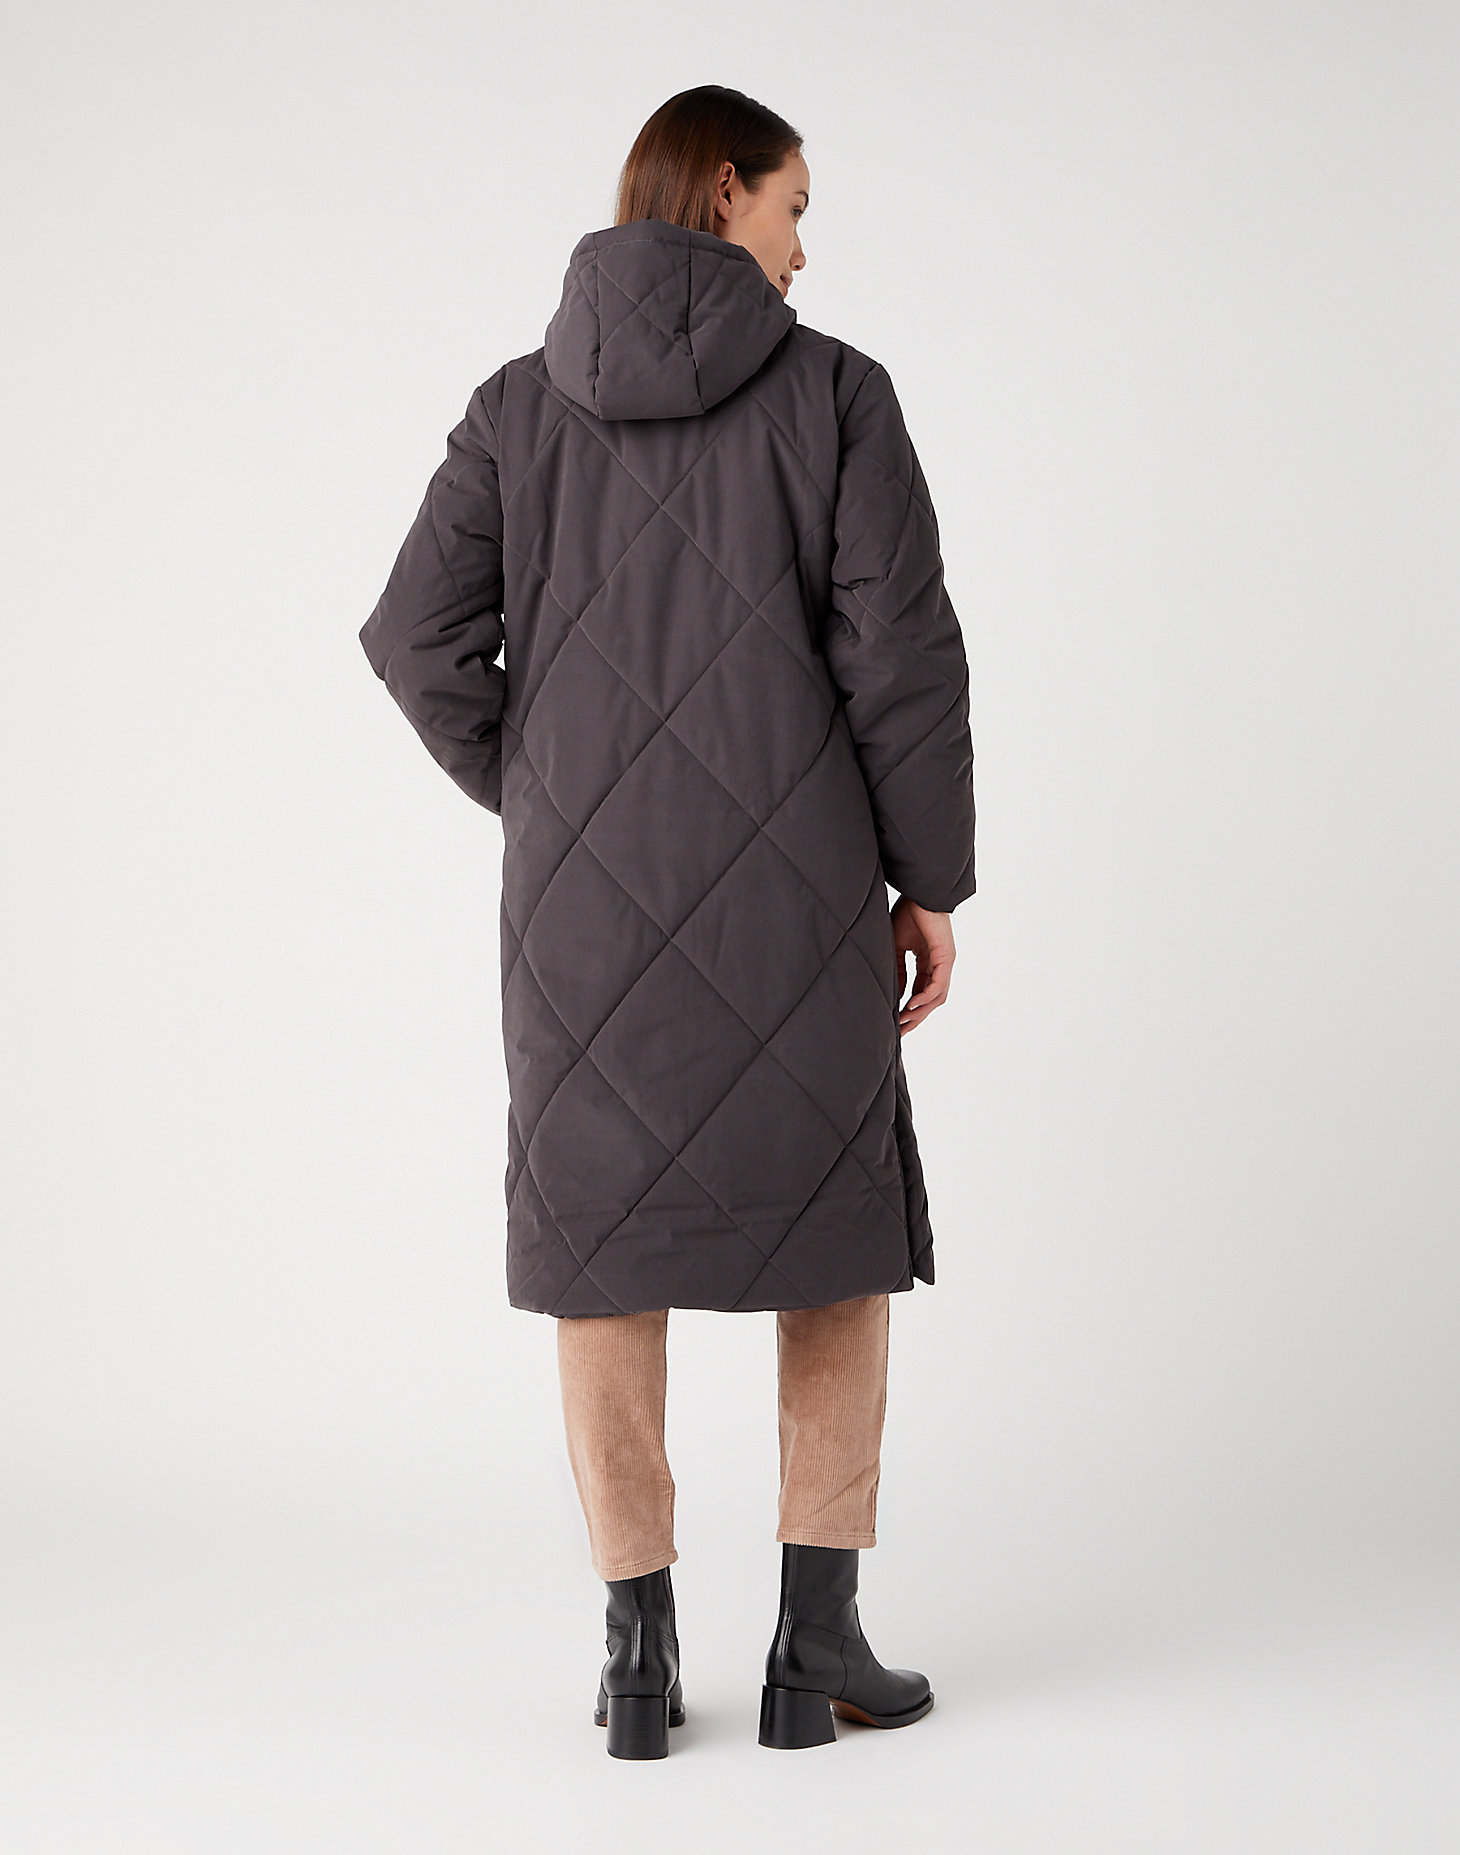 Long Quilted Jacket in Faded Black alternative view 2